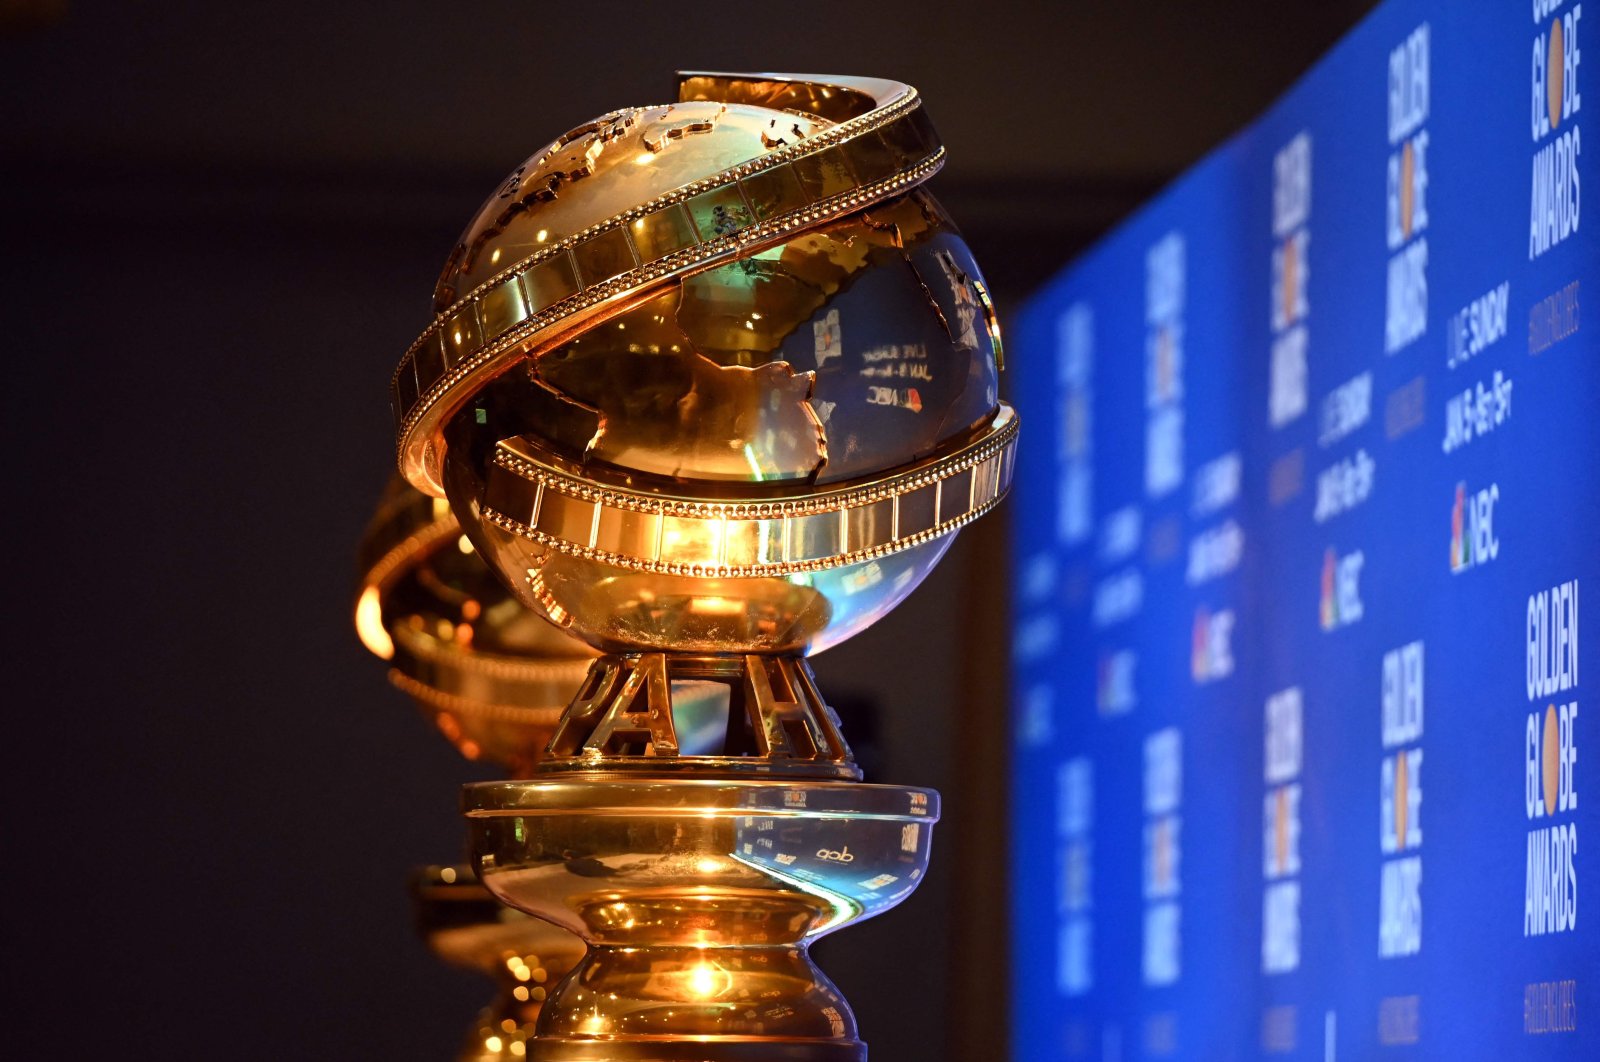 Golden Globe statues are set by the stage ahead of the 77th Annual Golden Globe Awards nominations announcement in Beverly Hills, California, on Dec. 9, 2019. (AFP Photo)